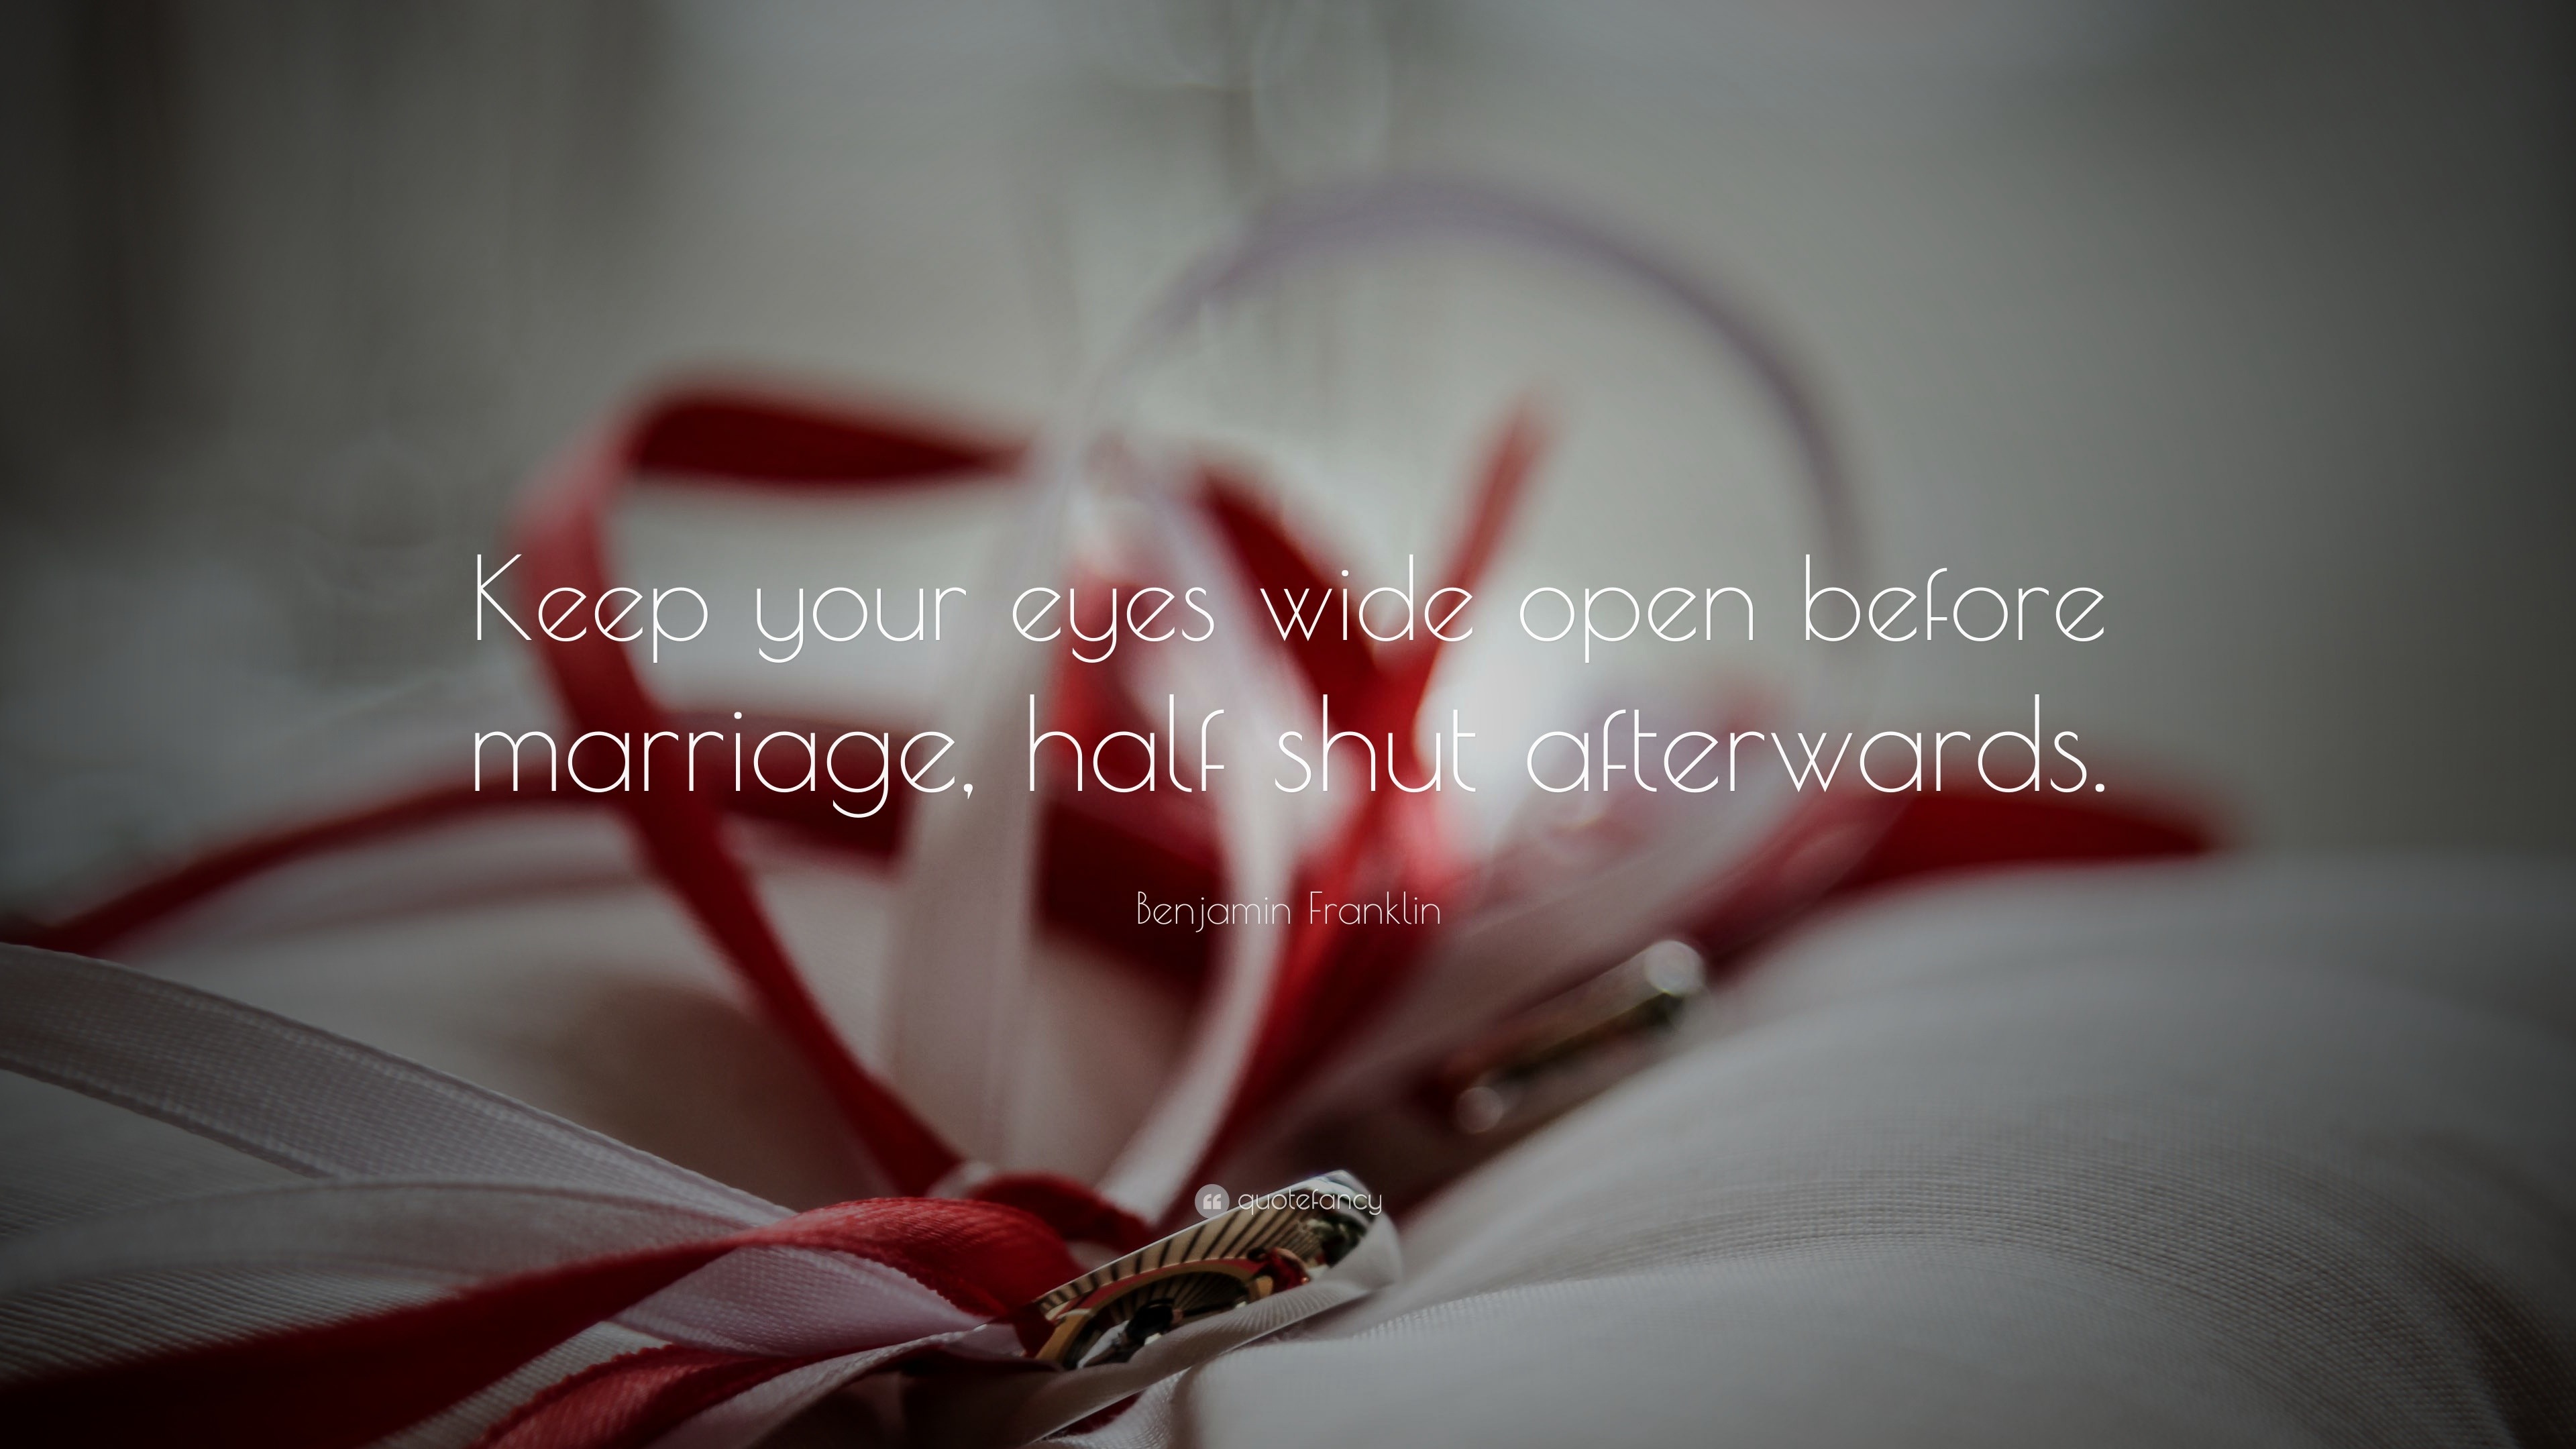 Marriage Quotes “Keep your eyes wide open before marriage half shut afterwards